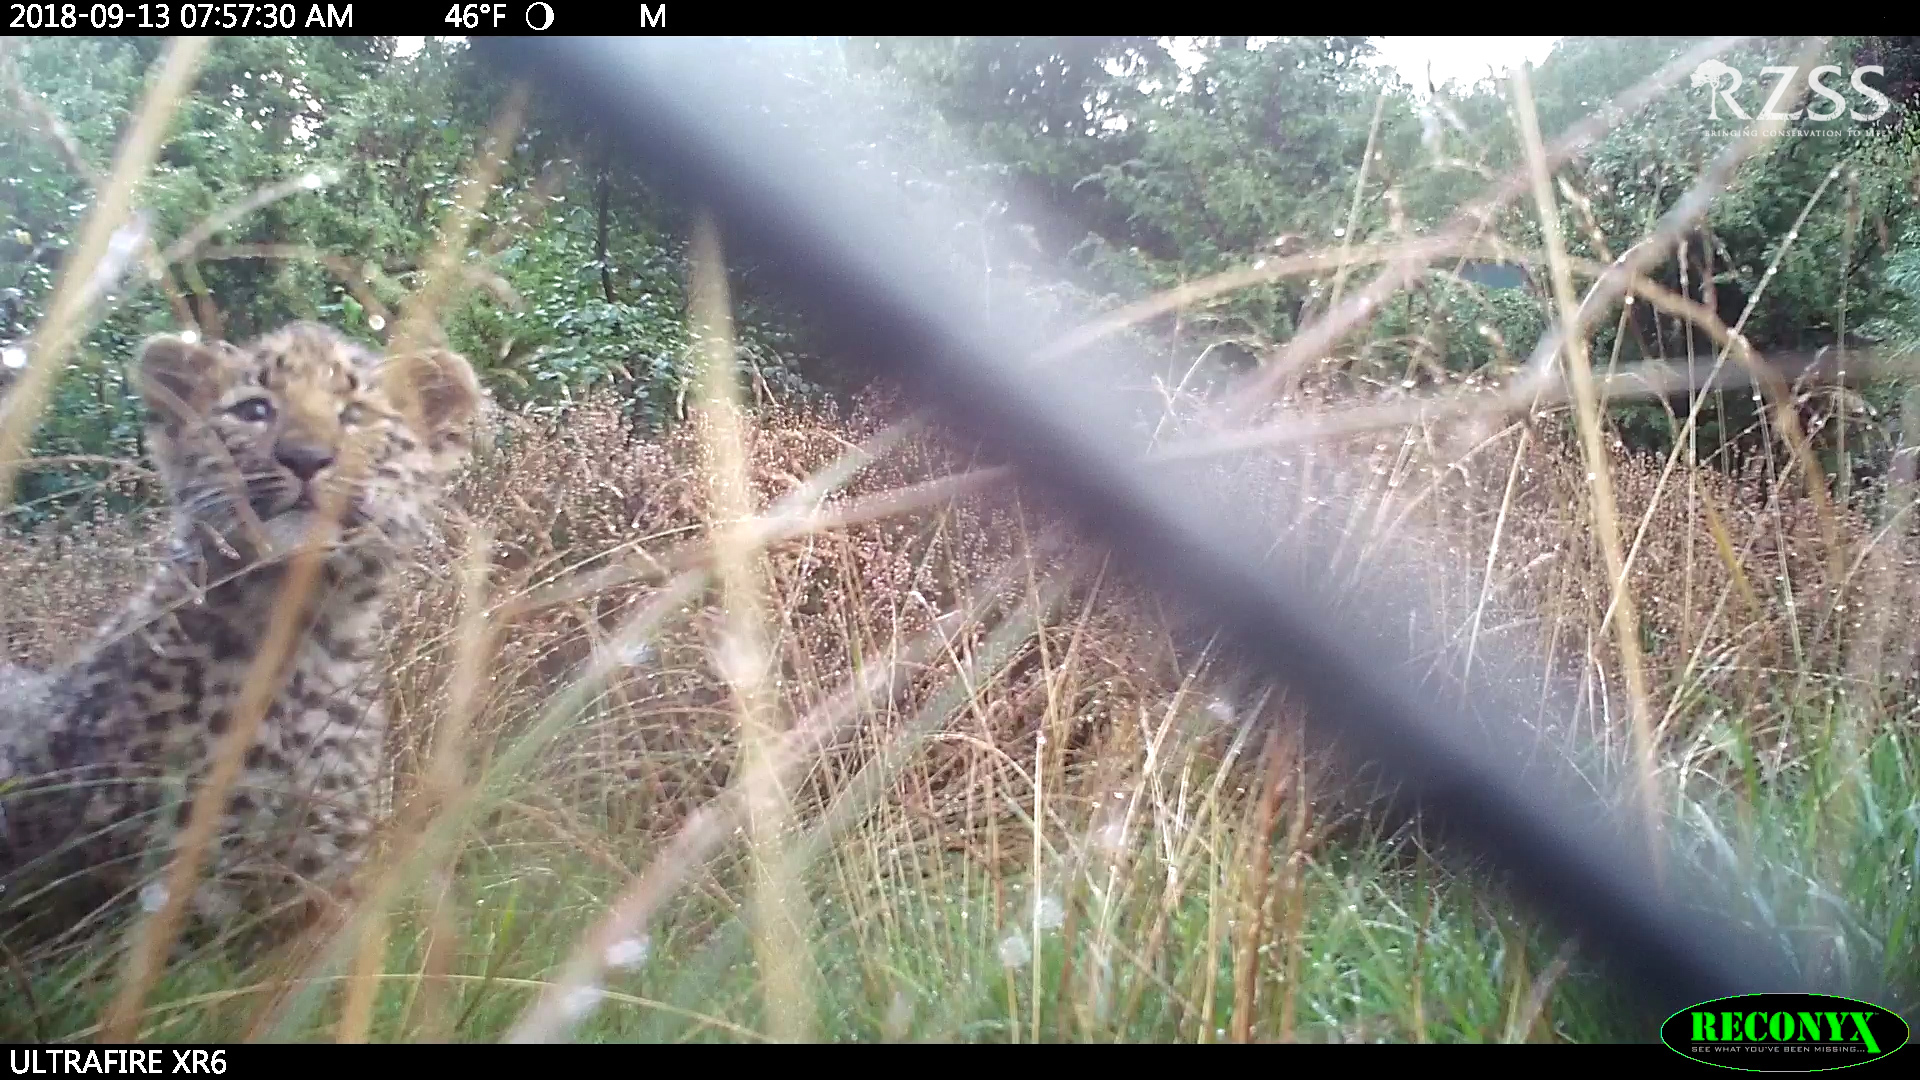 A still from the footage taken of the cubs.